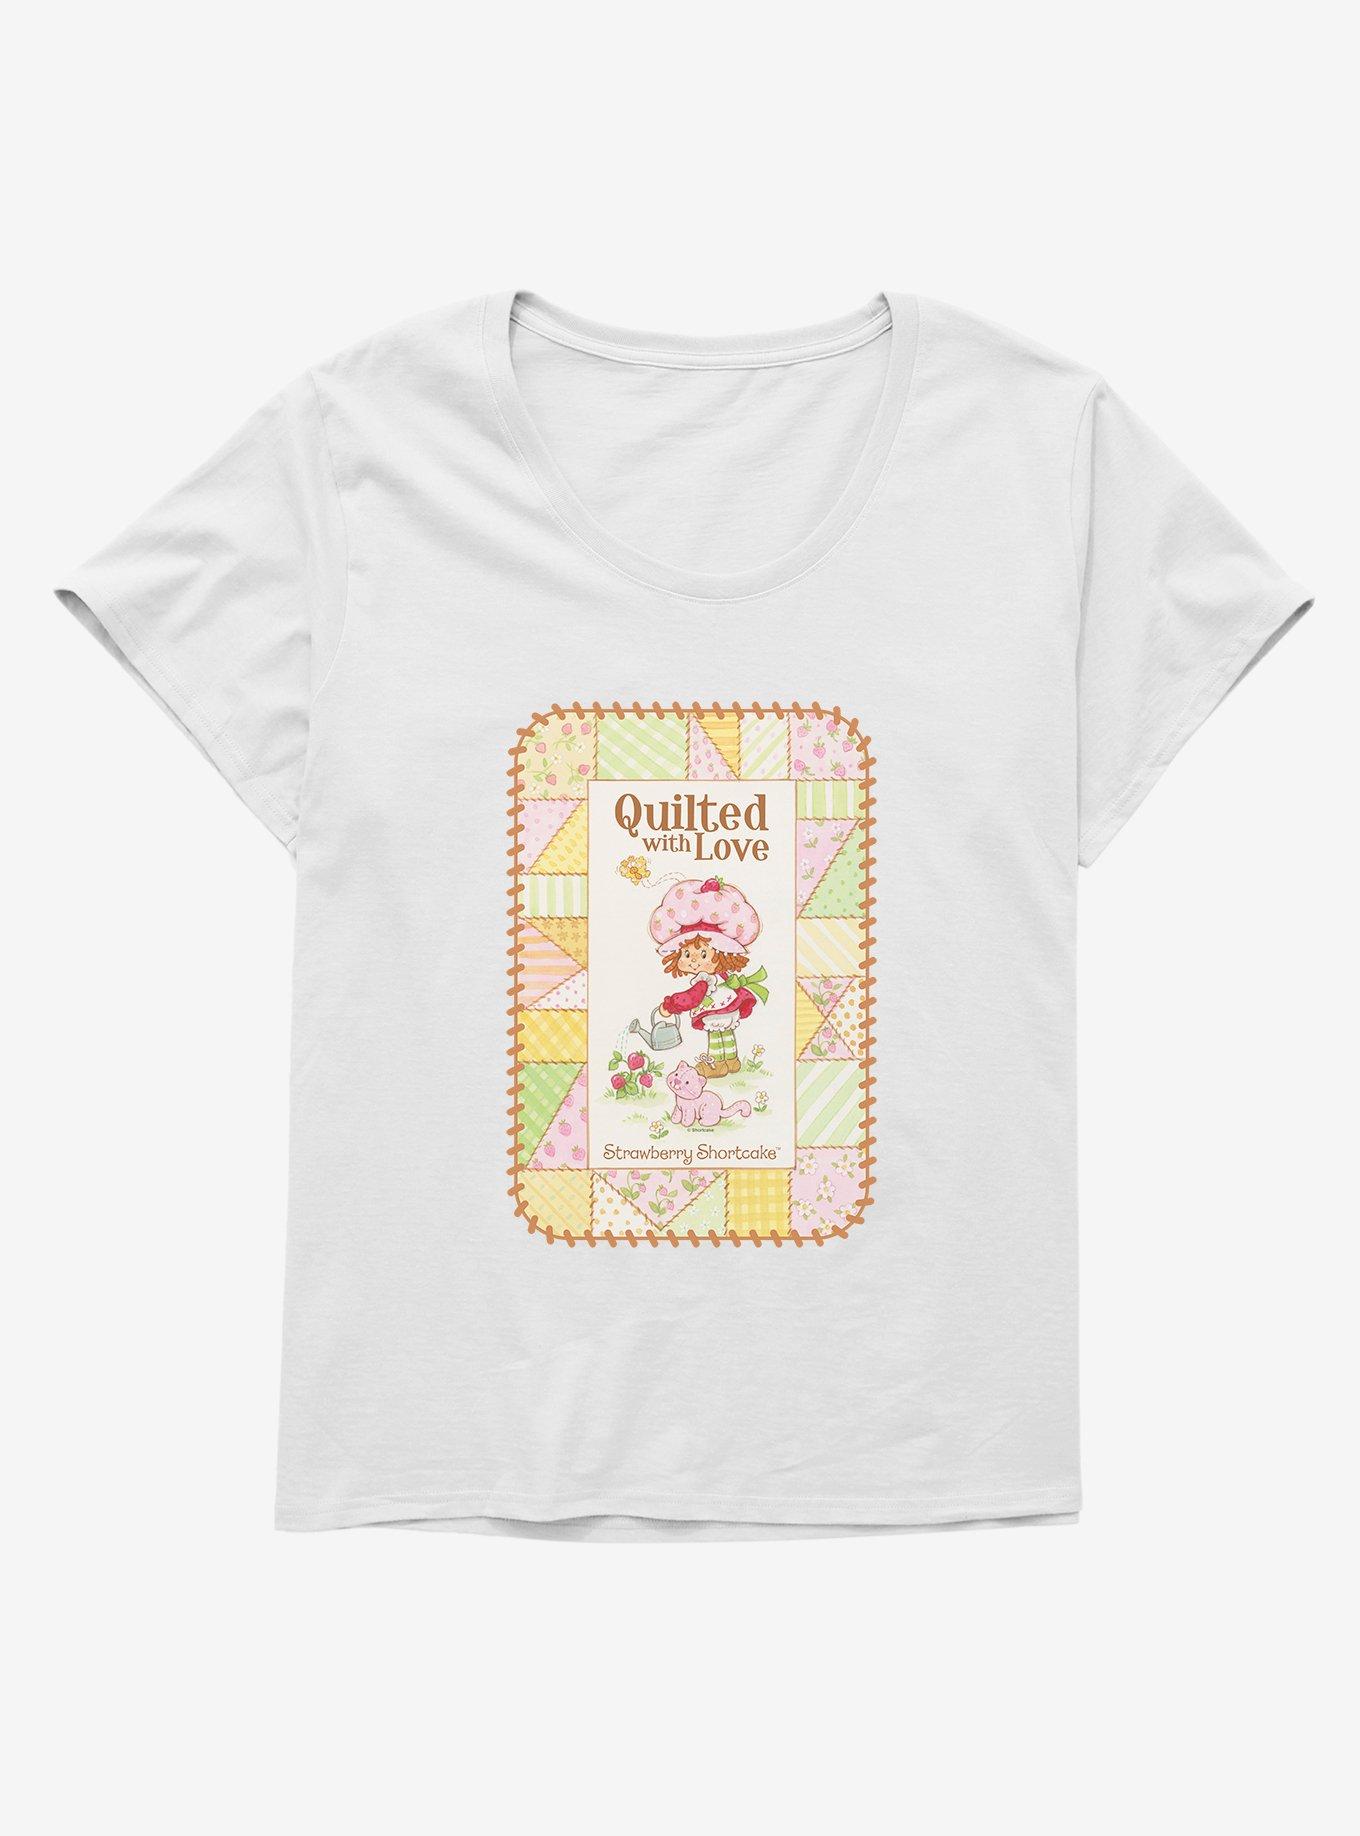 Strawberry Shortcake & Custard Quilted With Love Girls T-Shirt Plus